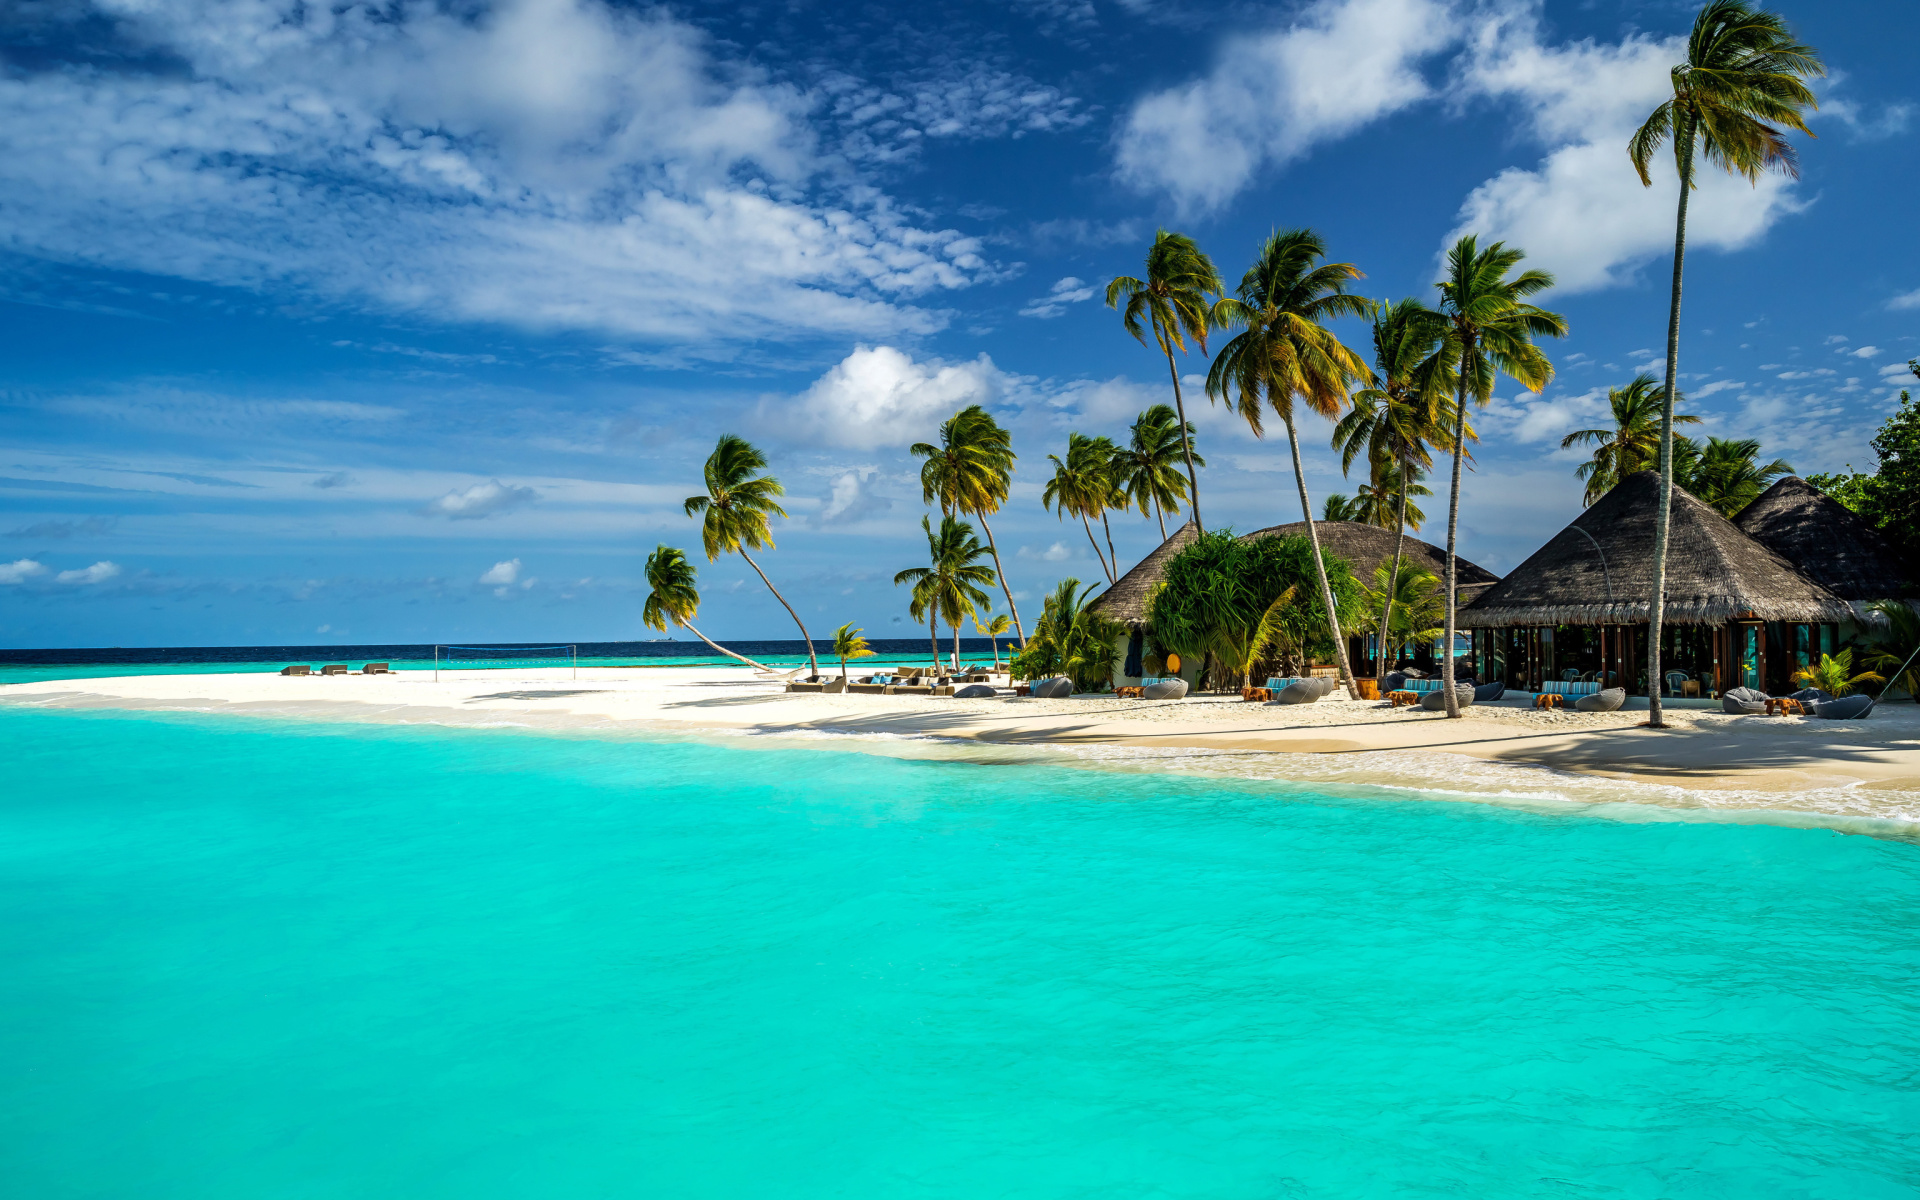 palm tree, maldives, turquoise, photography, holiday, bungalow, cloud, horizon, hut, man made, ocean, sky, tropical